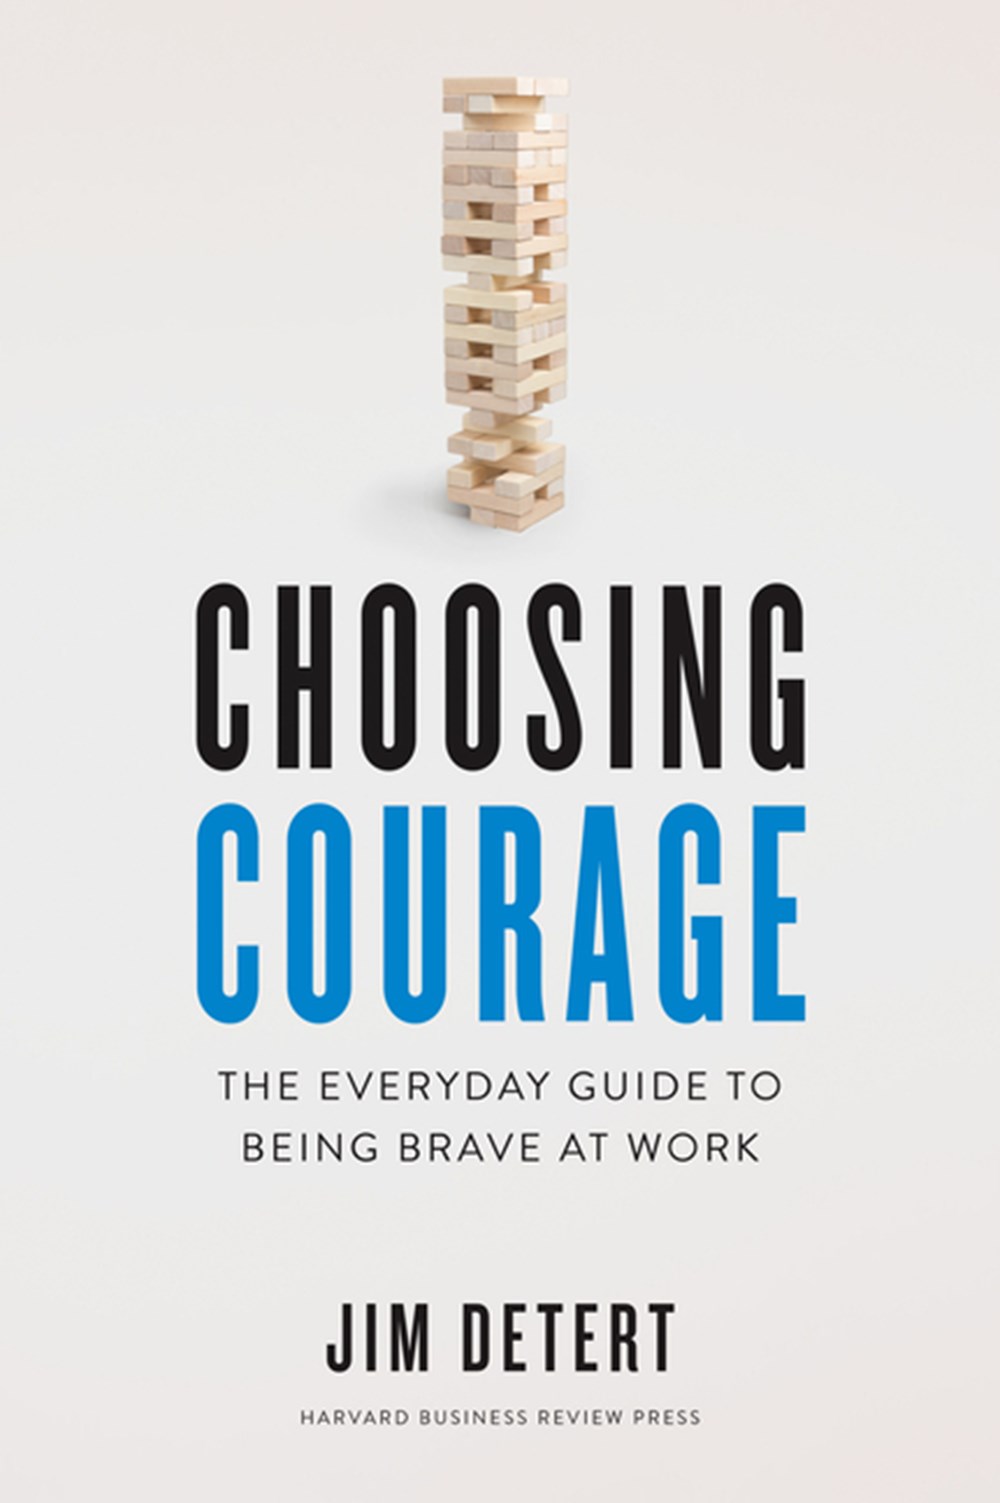 Choosing Courage The Everyday Guide to Being Brave at Work